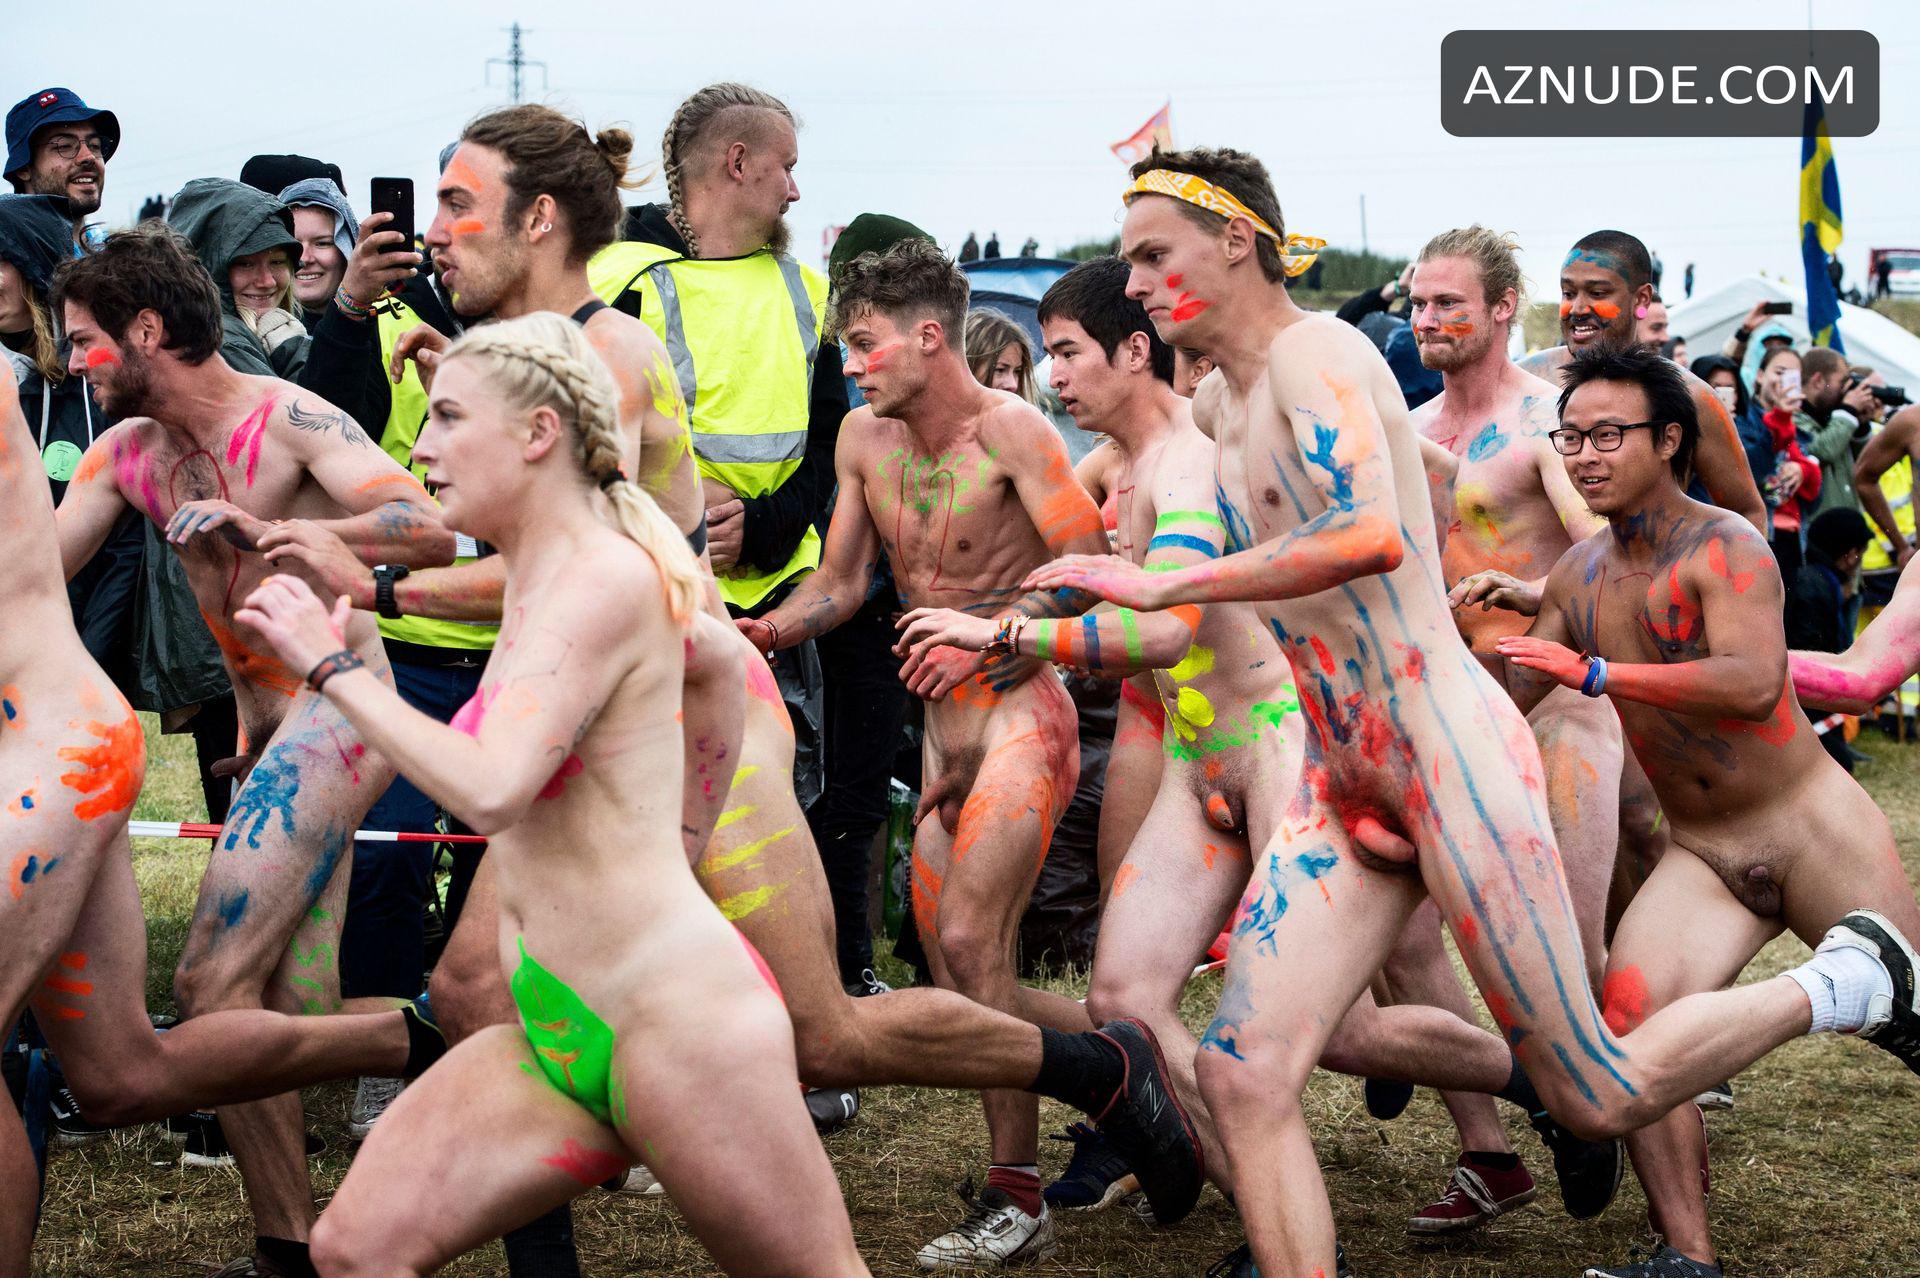 Sexy Nude Running Events Images